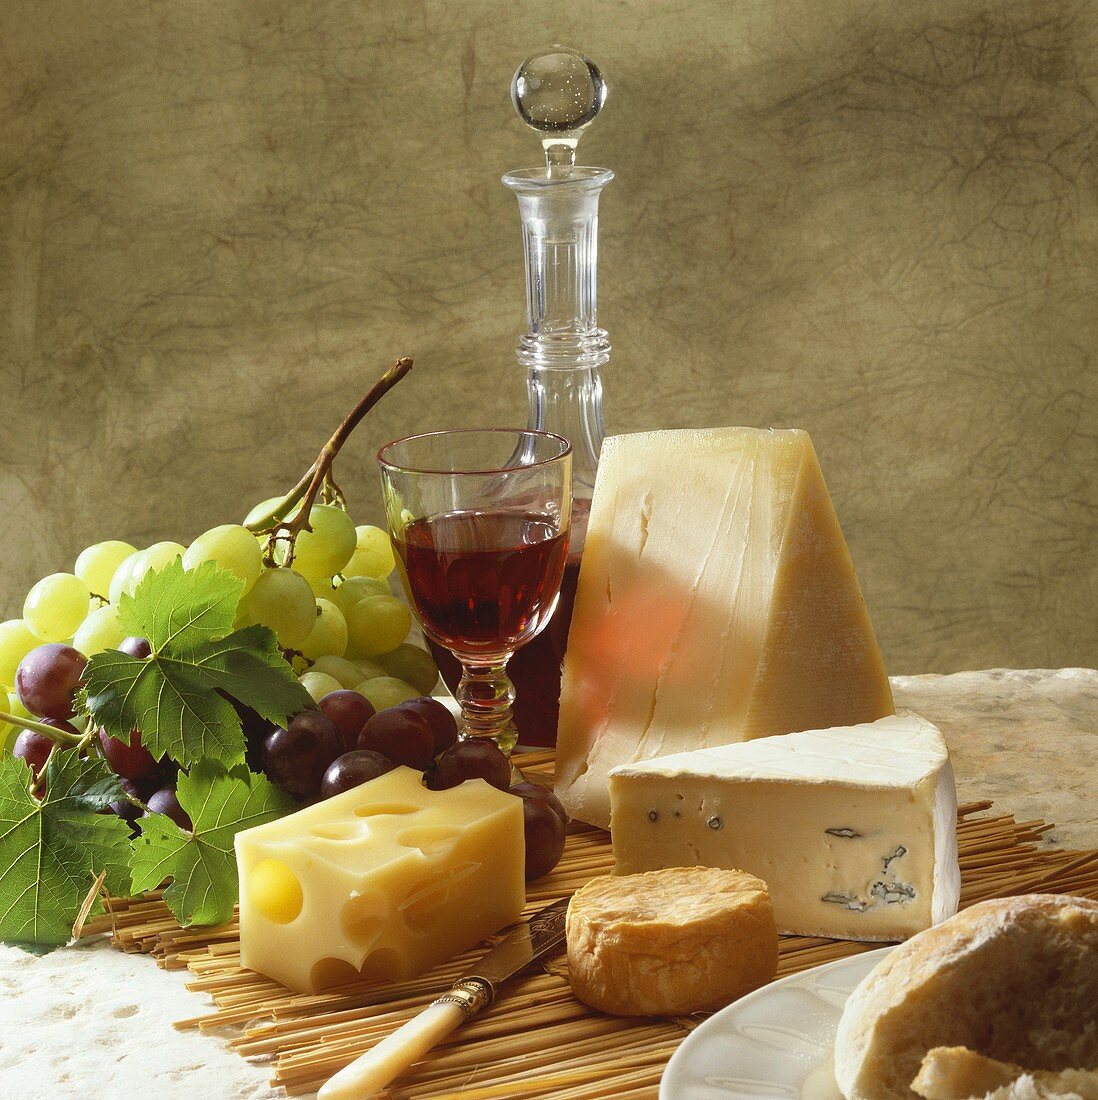 Still life with cheese, wine and grapes